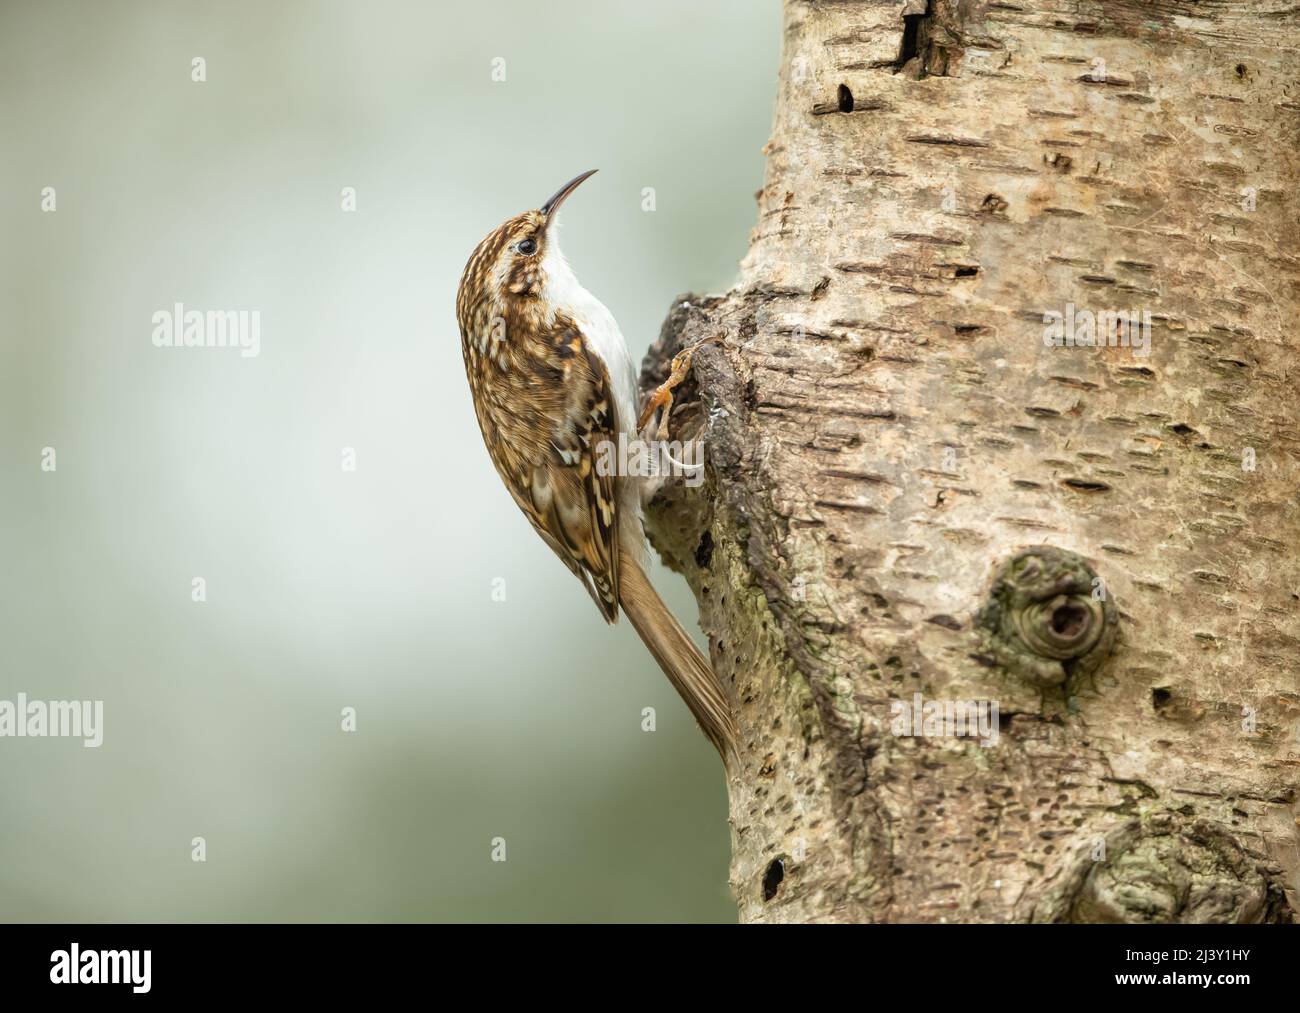 Close up of a Treecreeper in Springtime. Scientific name: Certhia familiaris, foraging on a Silver Birch tree.  Facing right.  Clean background with c Stock Photo